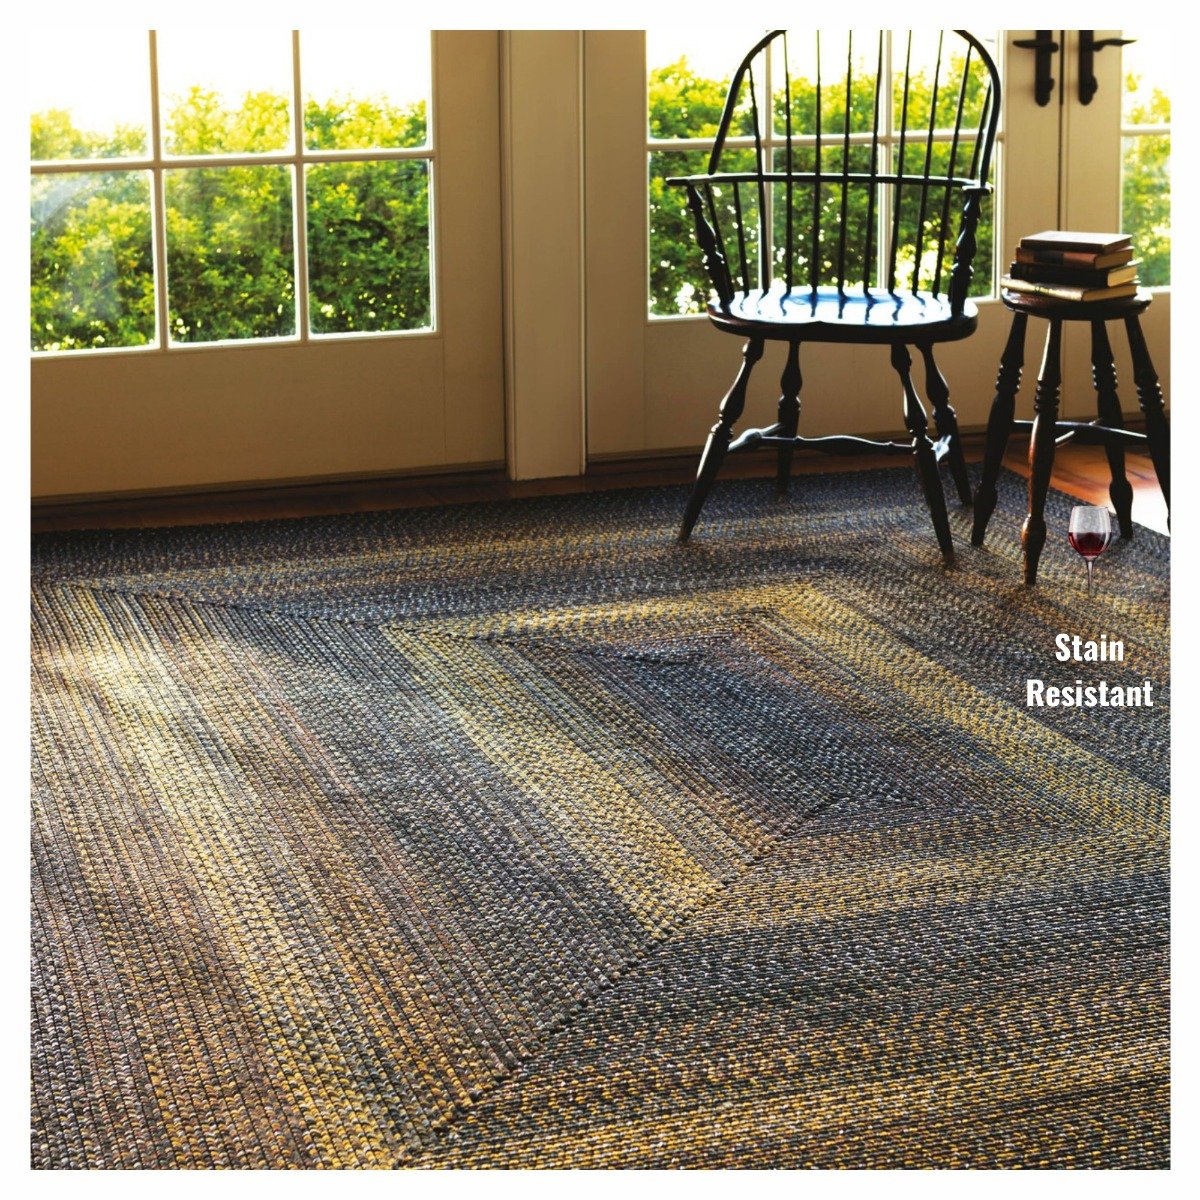 Graphite Grey Rectangular UD Braided Rugs Washable, Indoor-Outdoor